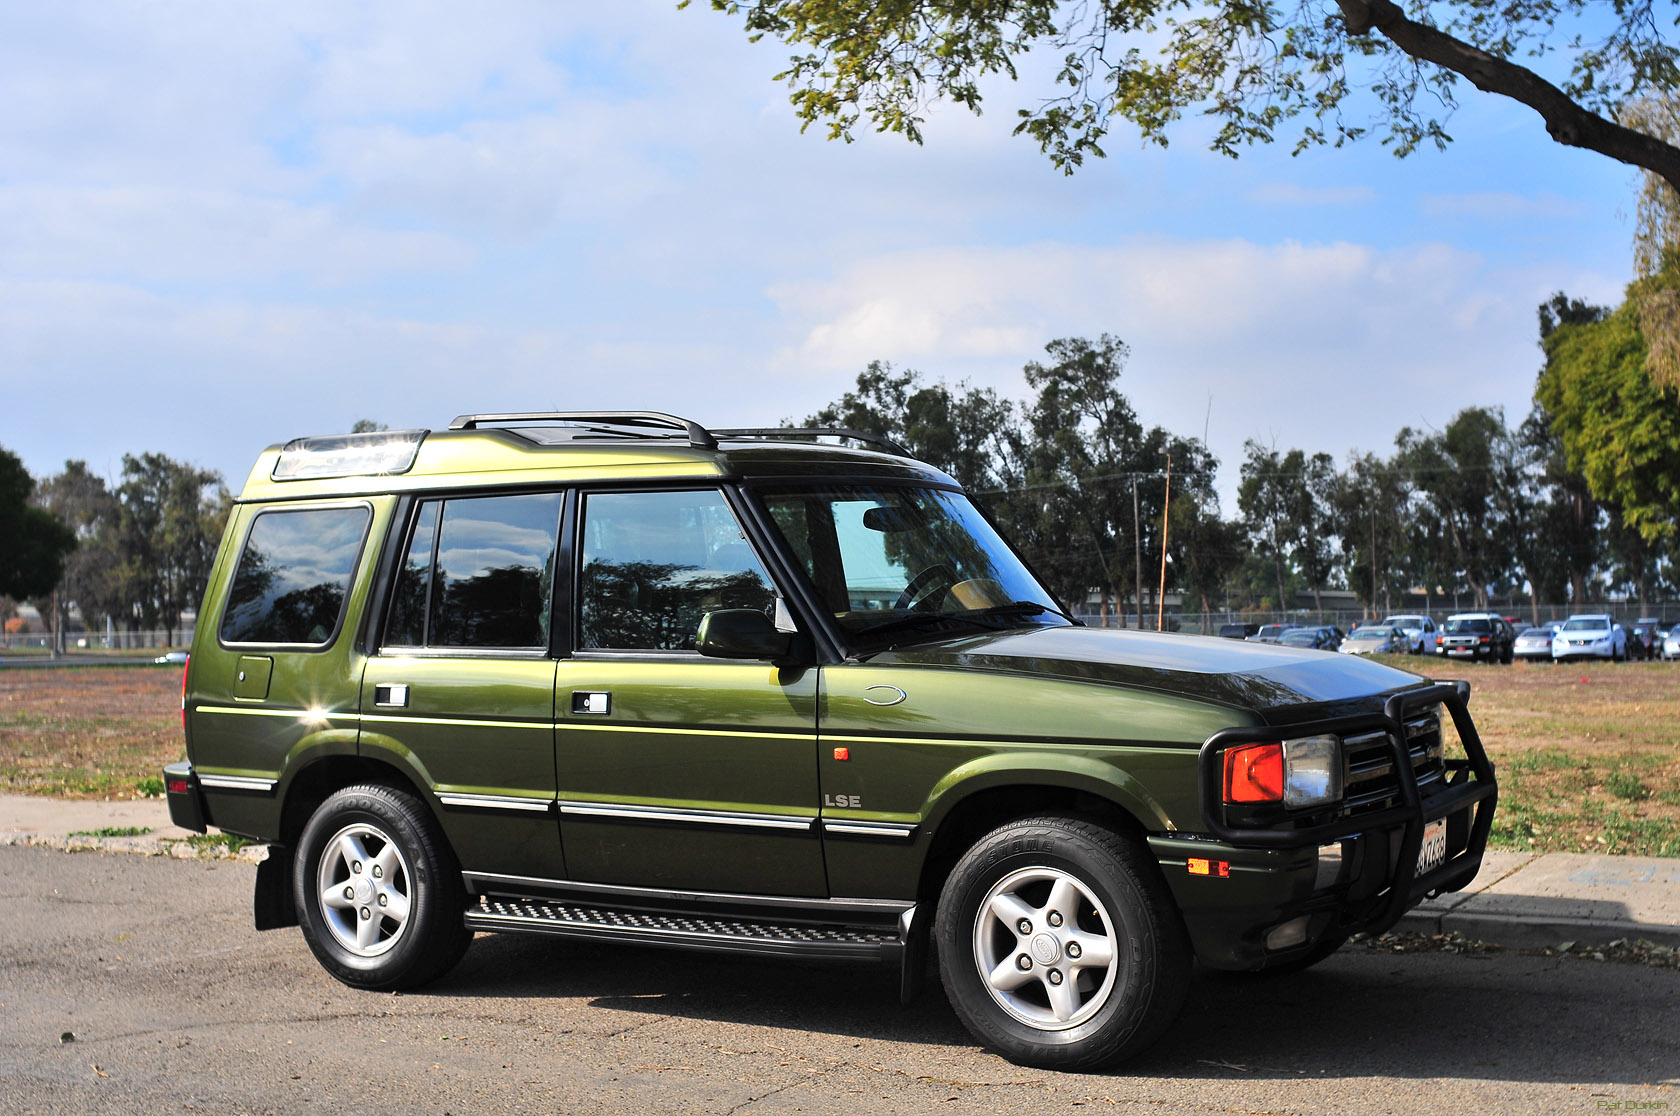 First discovery. Land Rover Discovery 1. Land Rover Discovery 1 1998. Land Rover Discovery 1998. Range Rover Discovery 1.